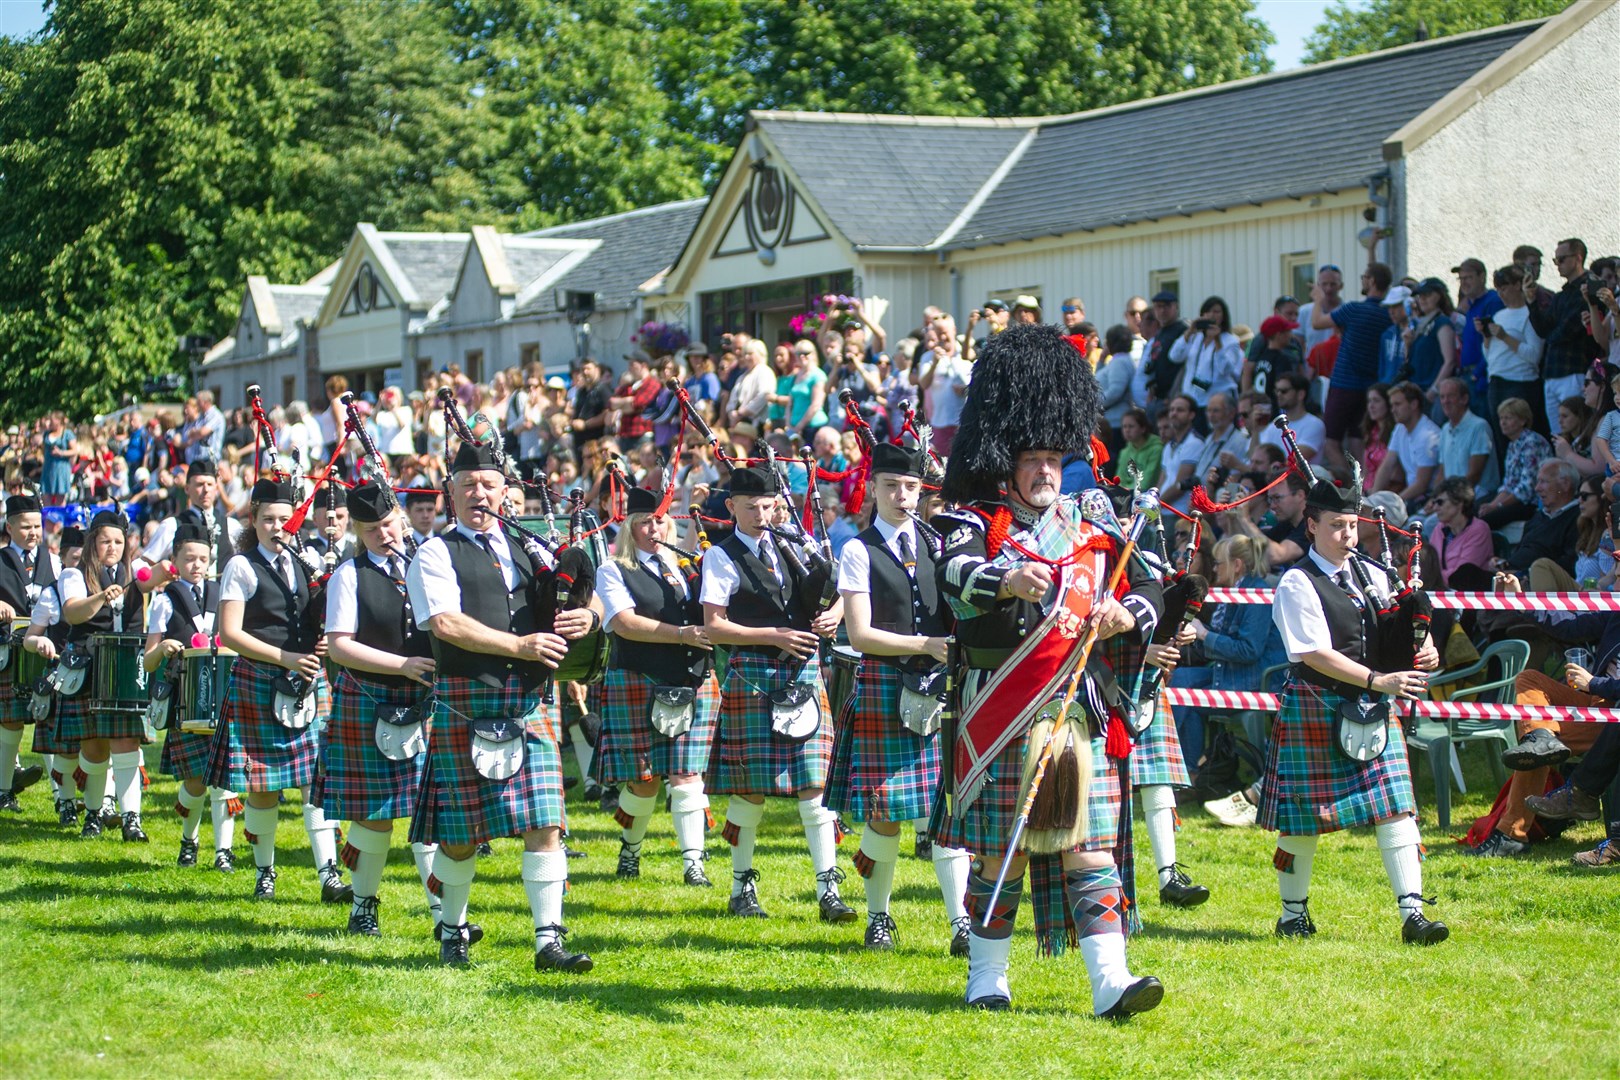 The Strathisla Pipe Band take to the field at the Aberlour Highland Games...The 76th Aberlour Stathspey Highland Games - 3rd August 2019. ..Picture: Daniel Forsyth. Image No.044579.